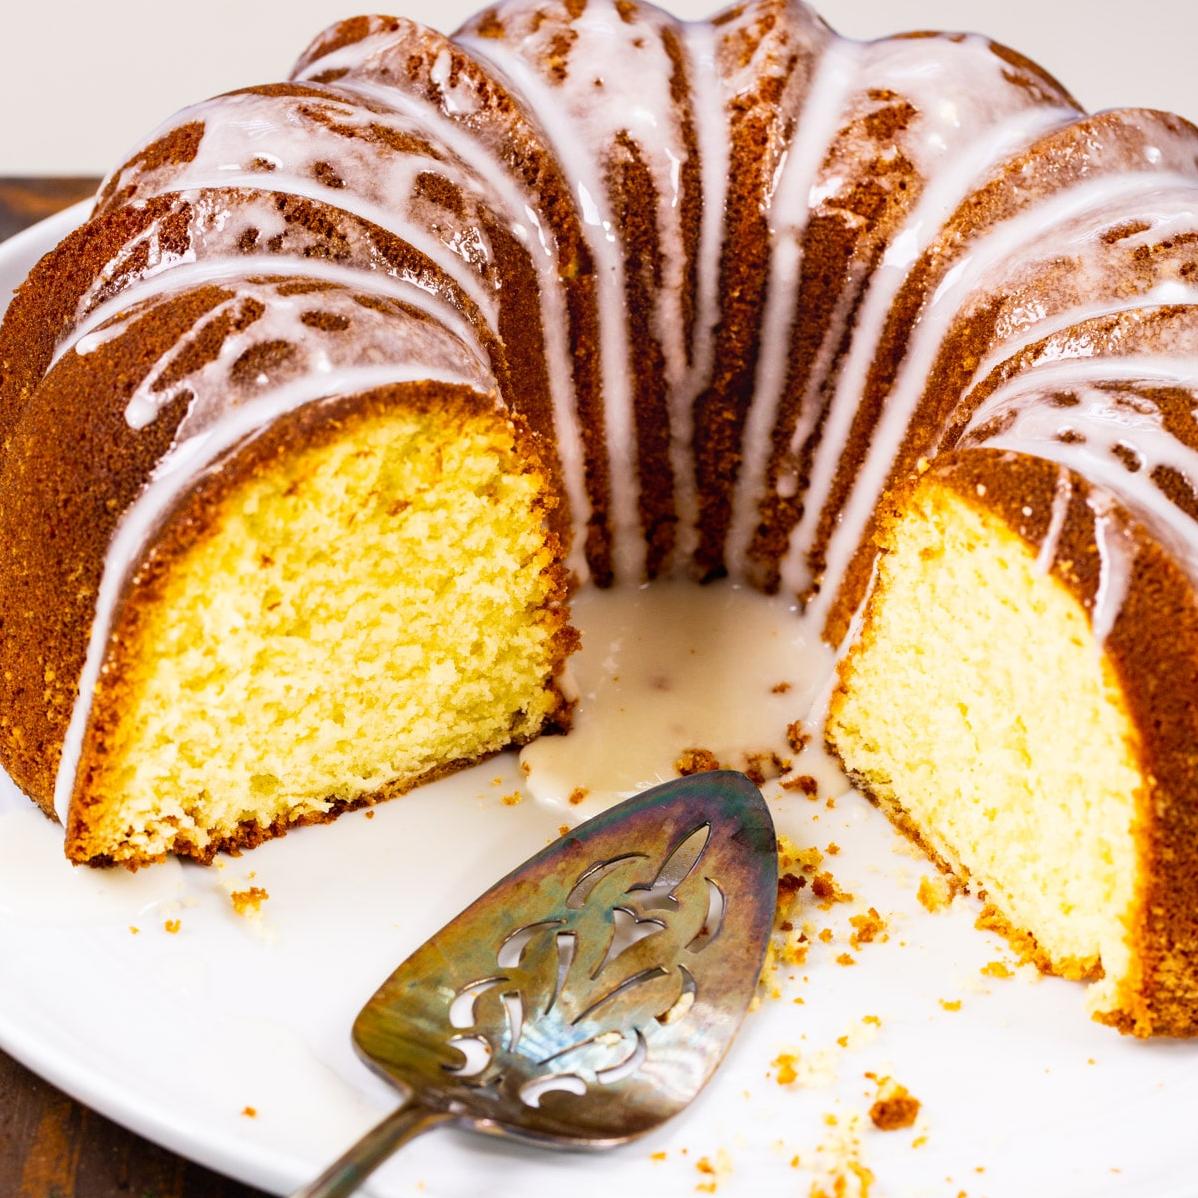  Savor every bite of this five-flavor pound cake!